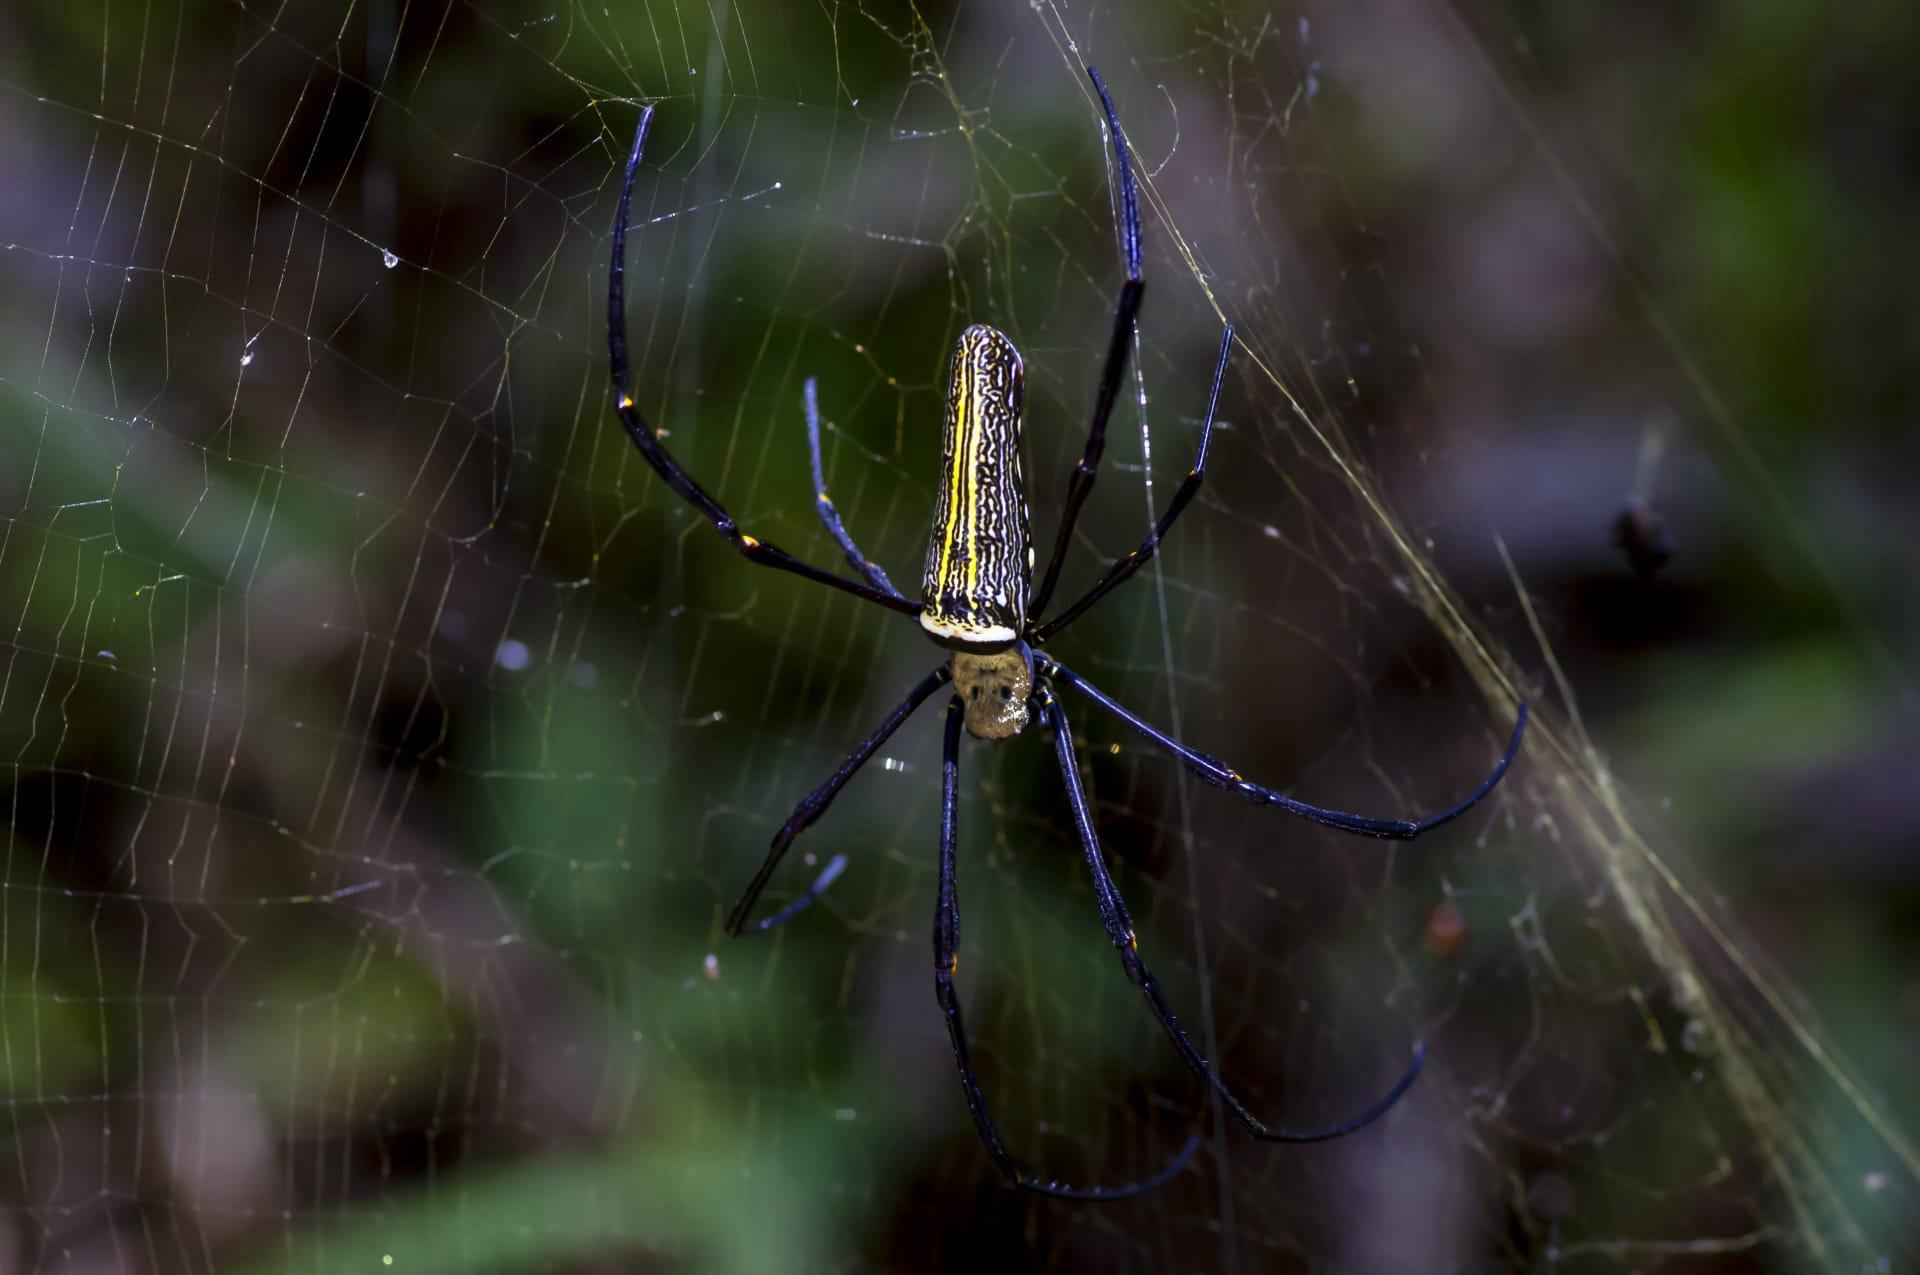 Banana spider pictures